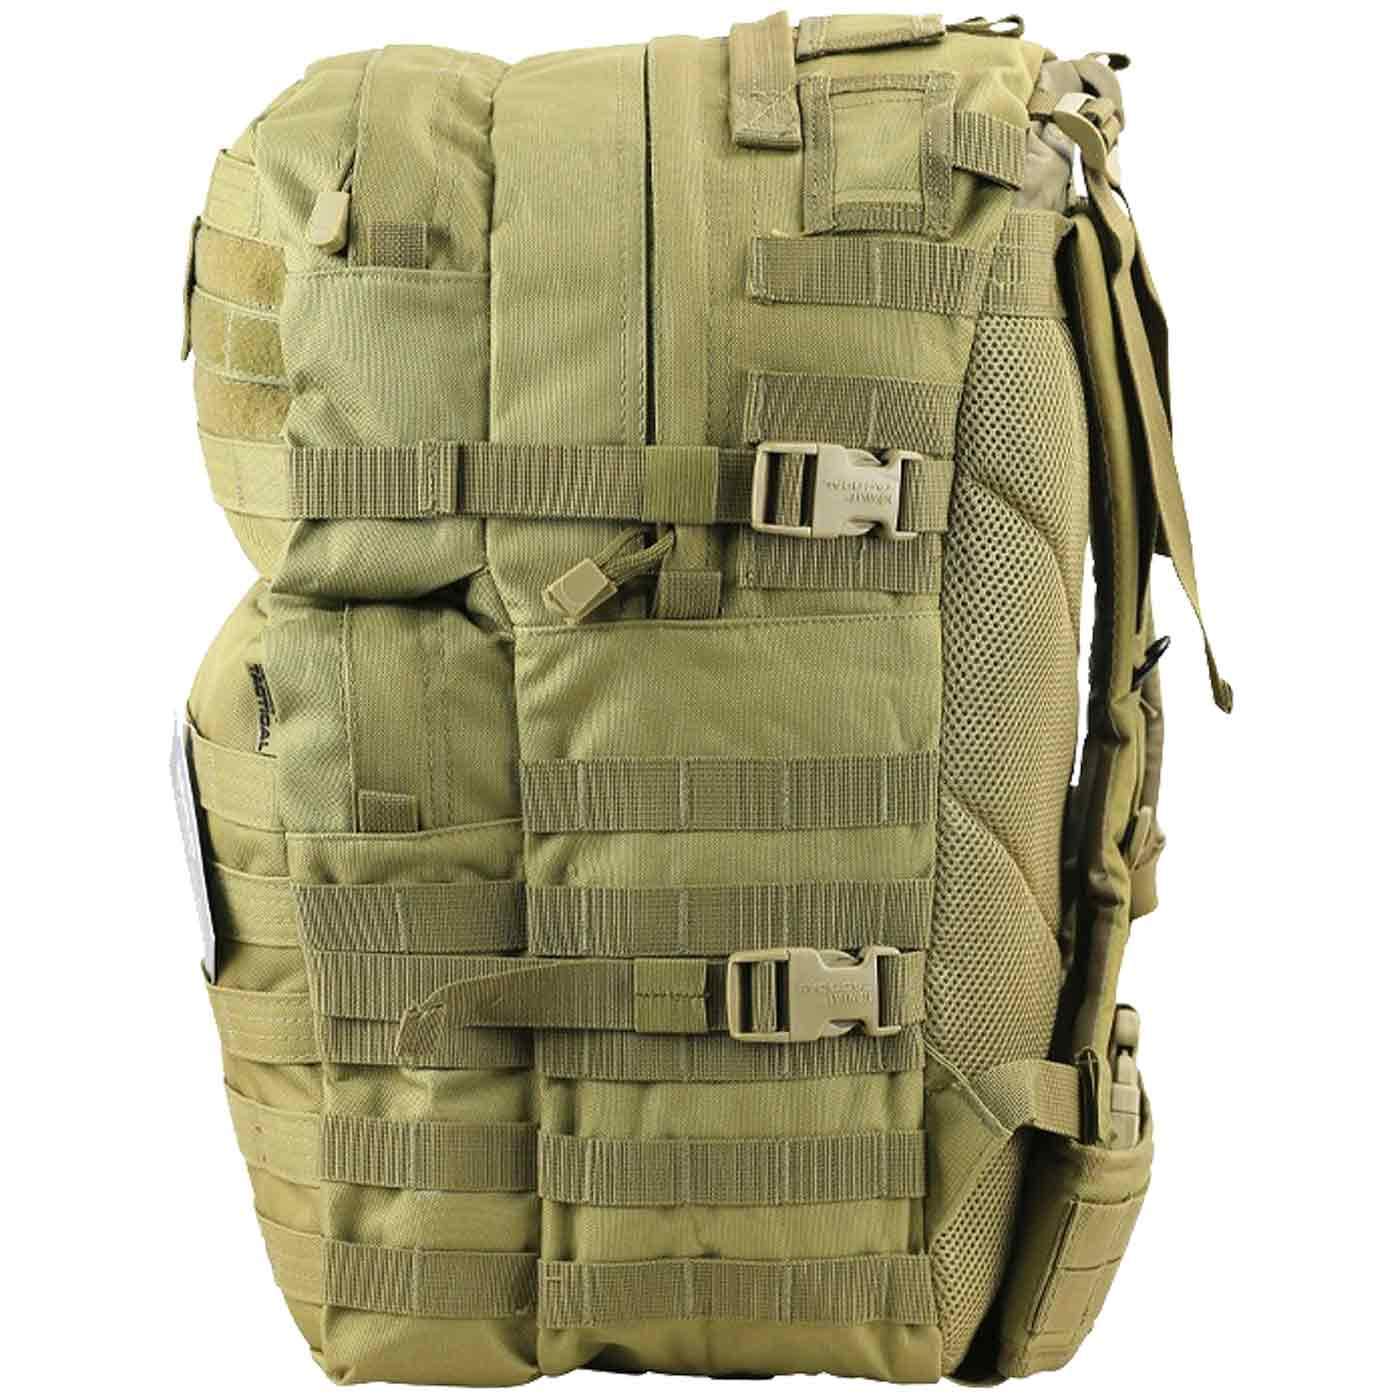 Kombat MOLLE Assault Pack 40L Army Tactical Recon Backpack Rucksack ...